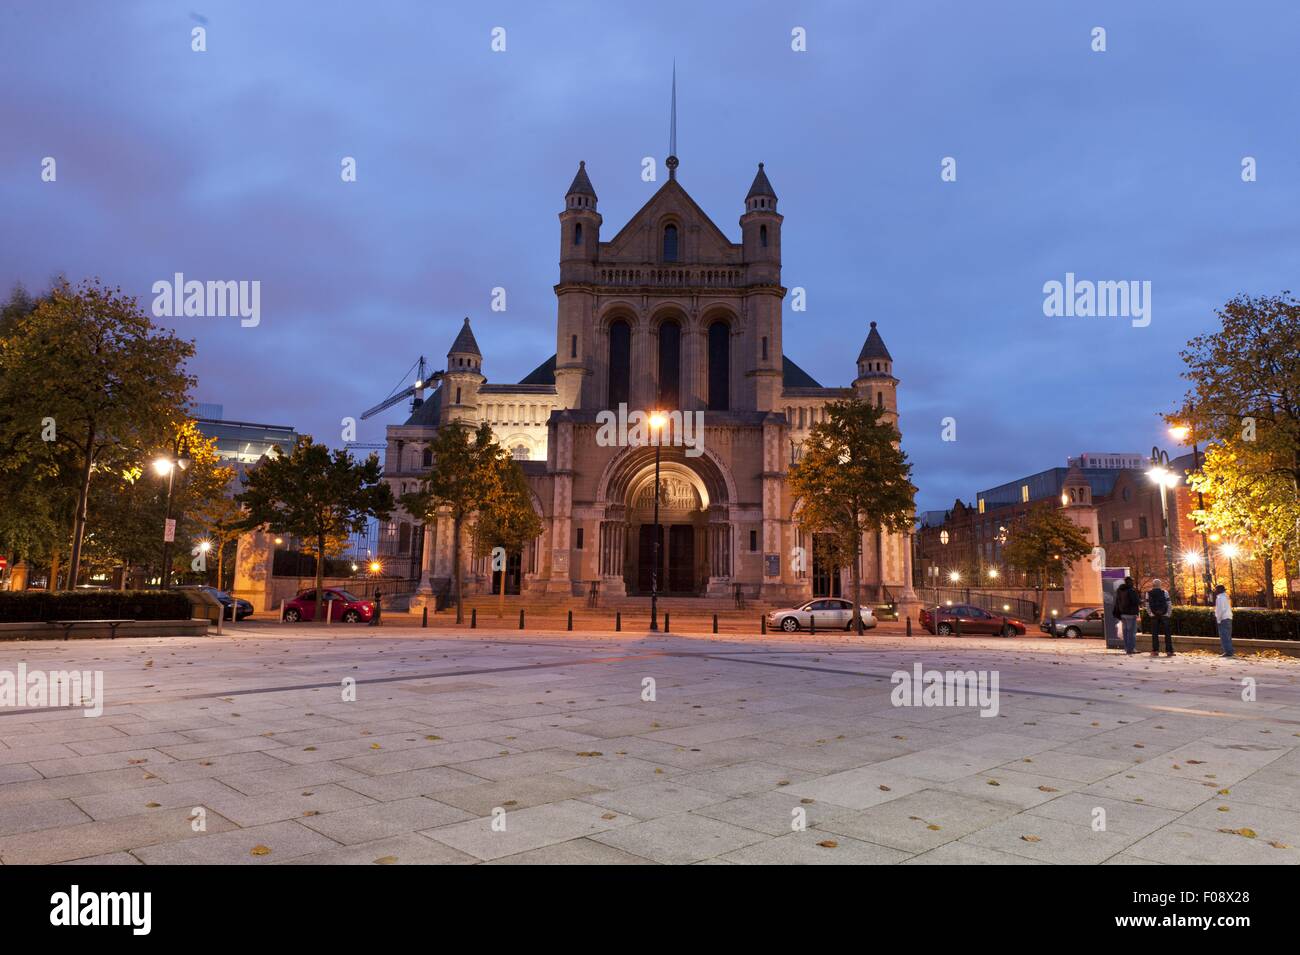 Facade of St. Annes Cathedral illuminated at night in Belfast, Ireland Stock Photo